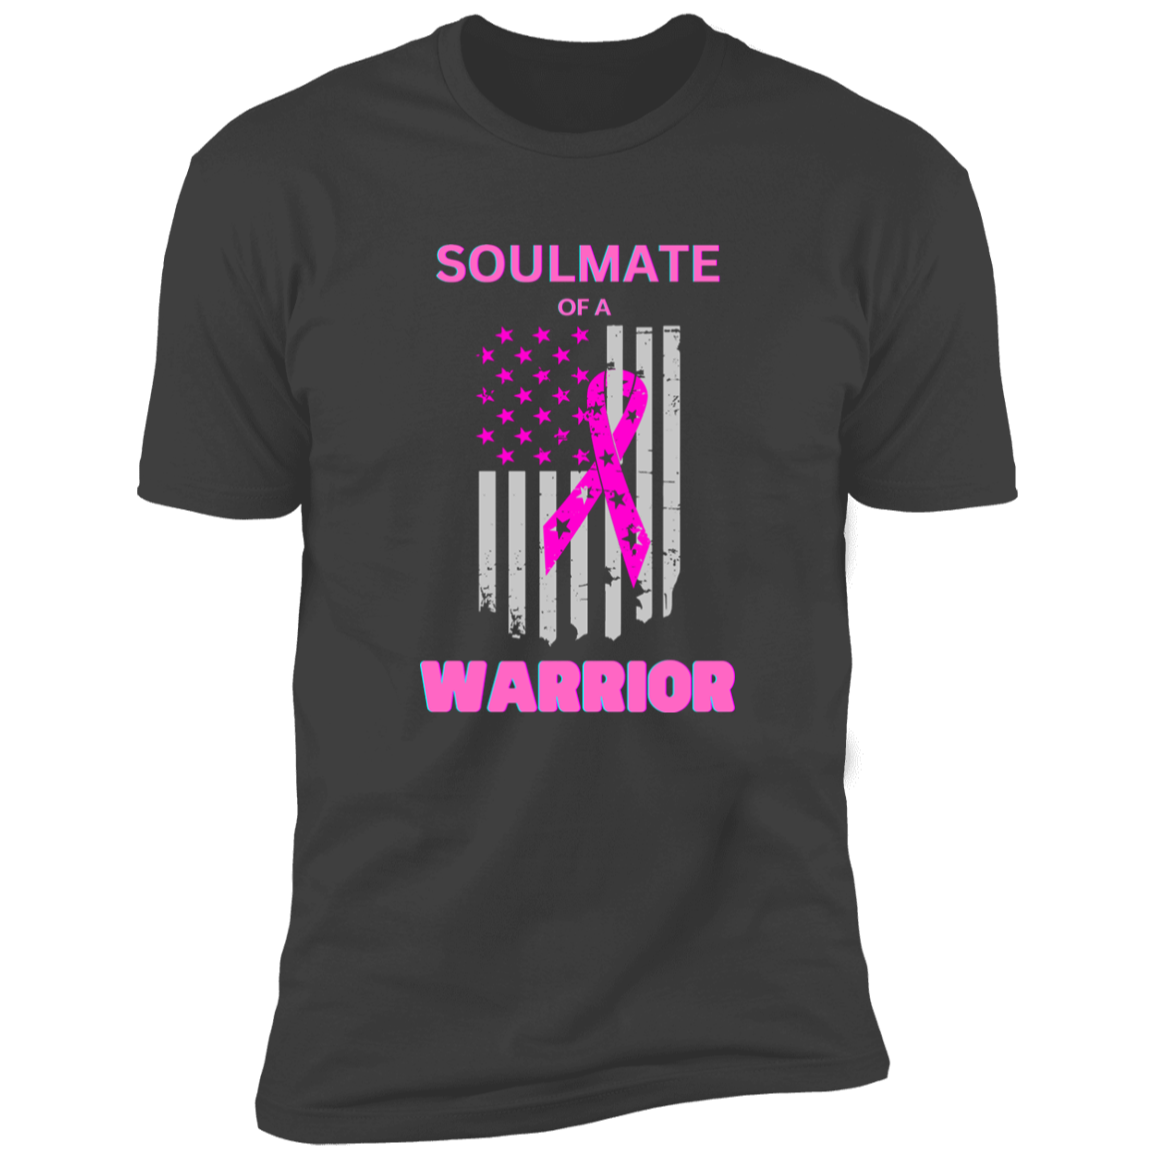 Soulmate of A Warrior